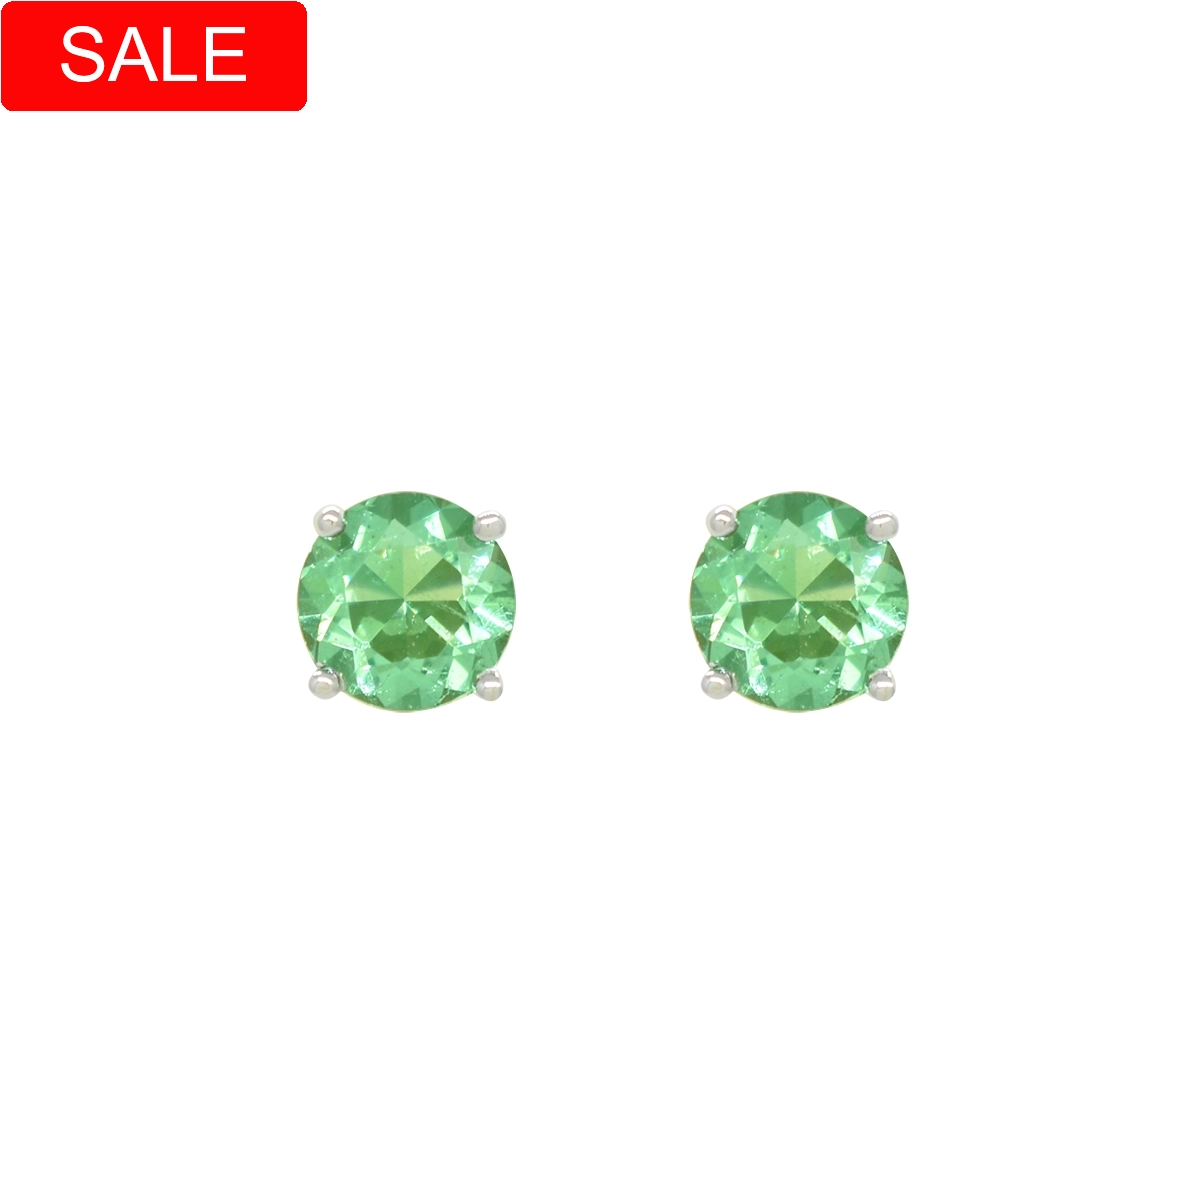 Stud Earrings with Natural Colombian Emeralds in a Timeless Prong Setting